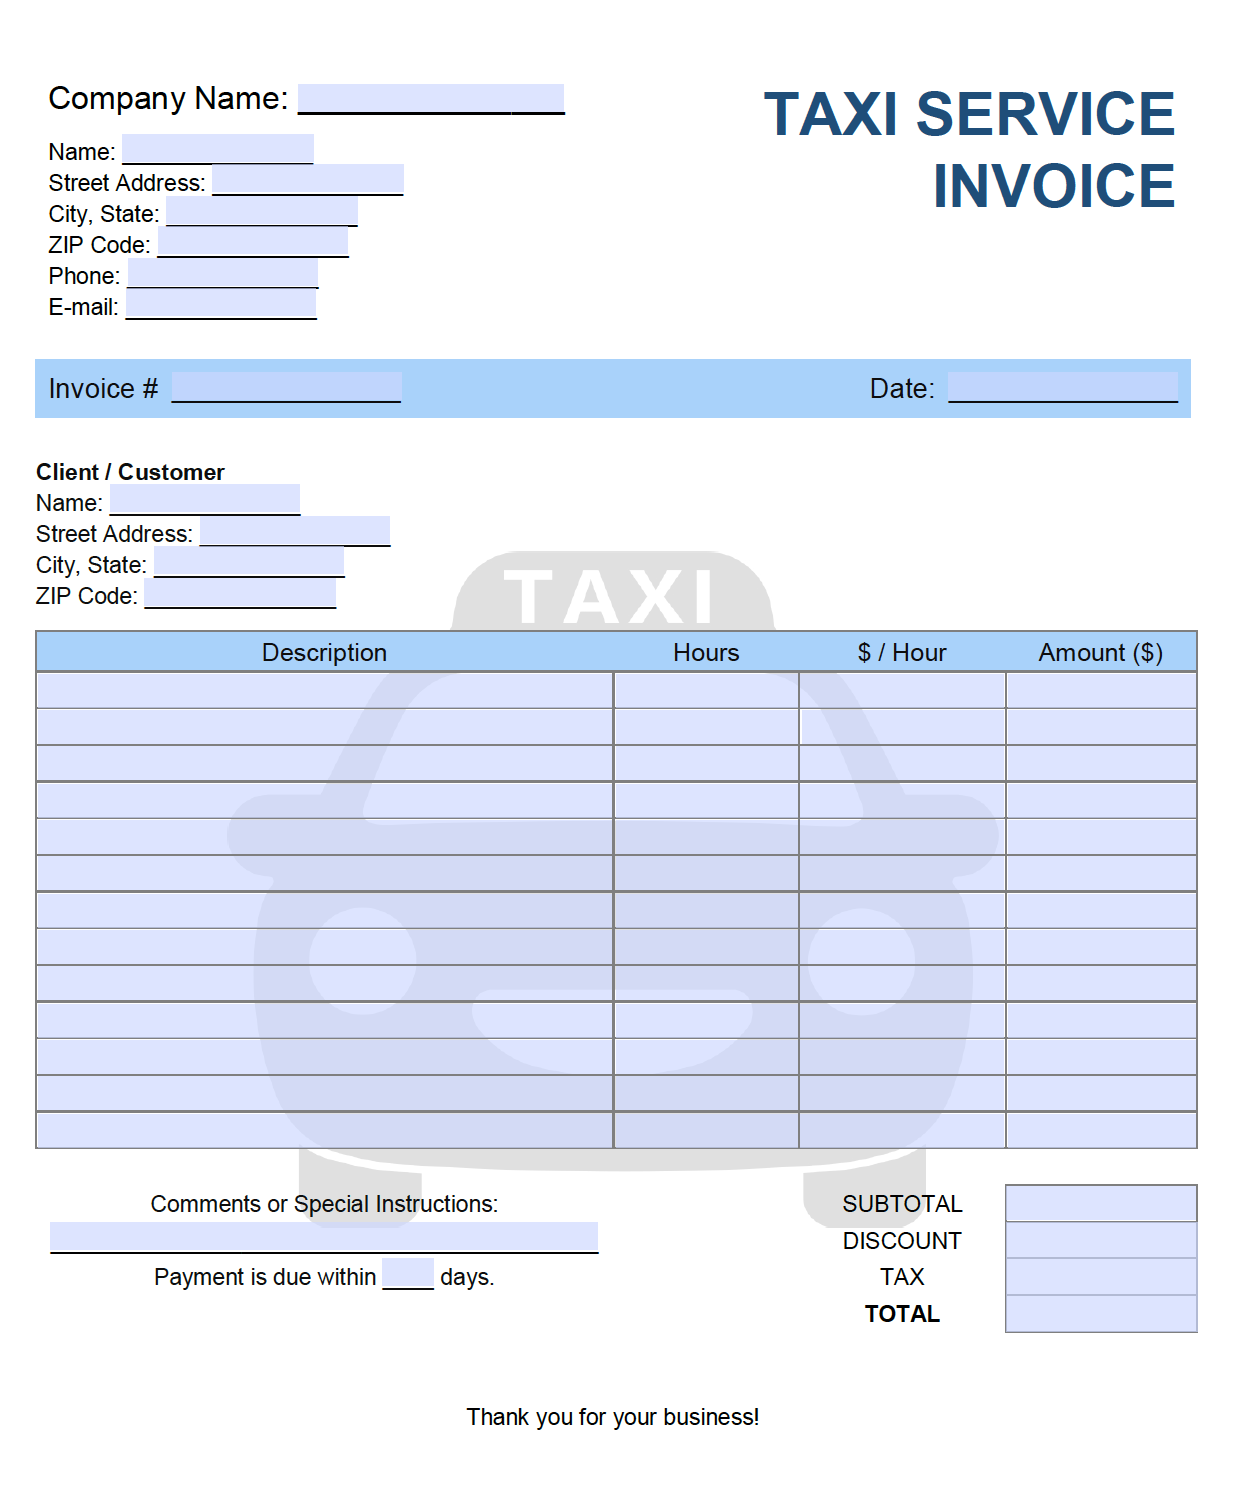 Taxi receipts expenses blanks 10 different designs 100 cab receipts in total